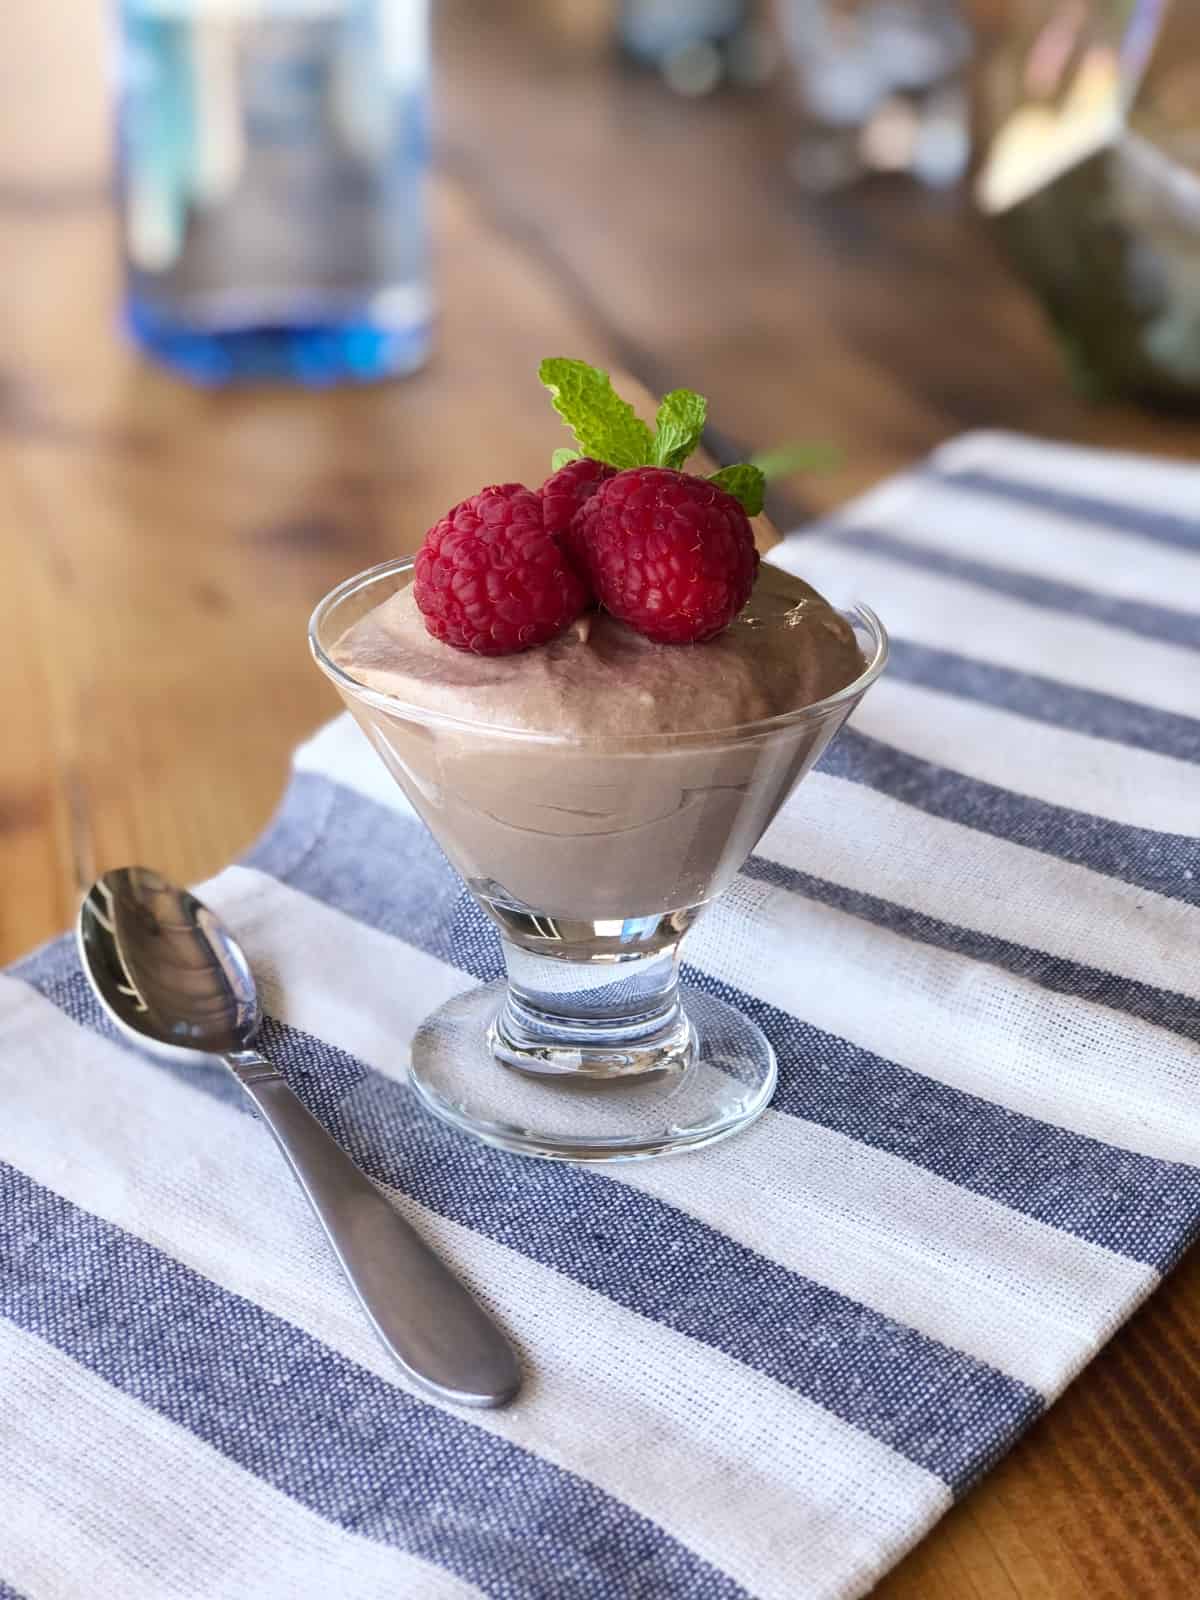 Stemmed dessert glass filled with Nutella mousse and garnished with fresh raspberries and mint.